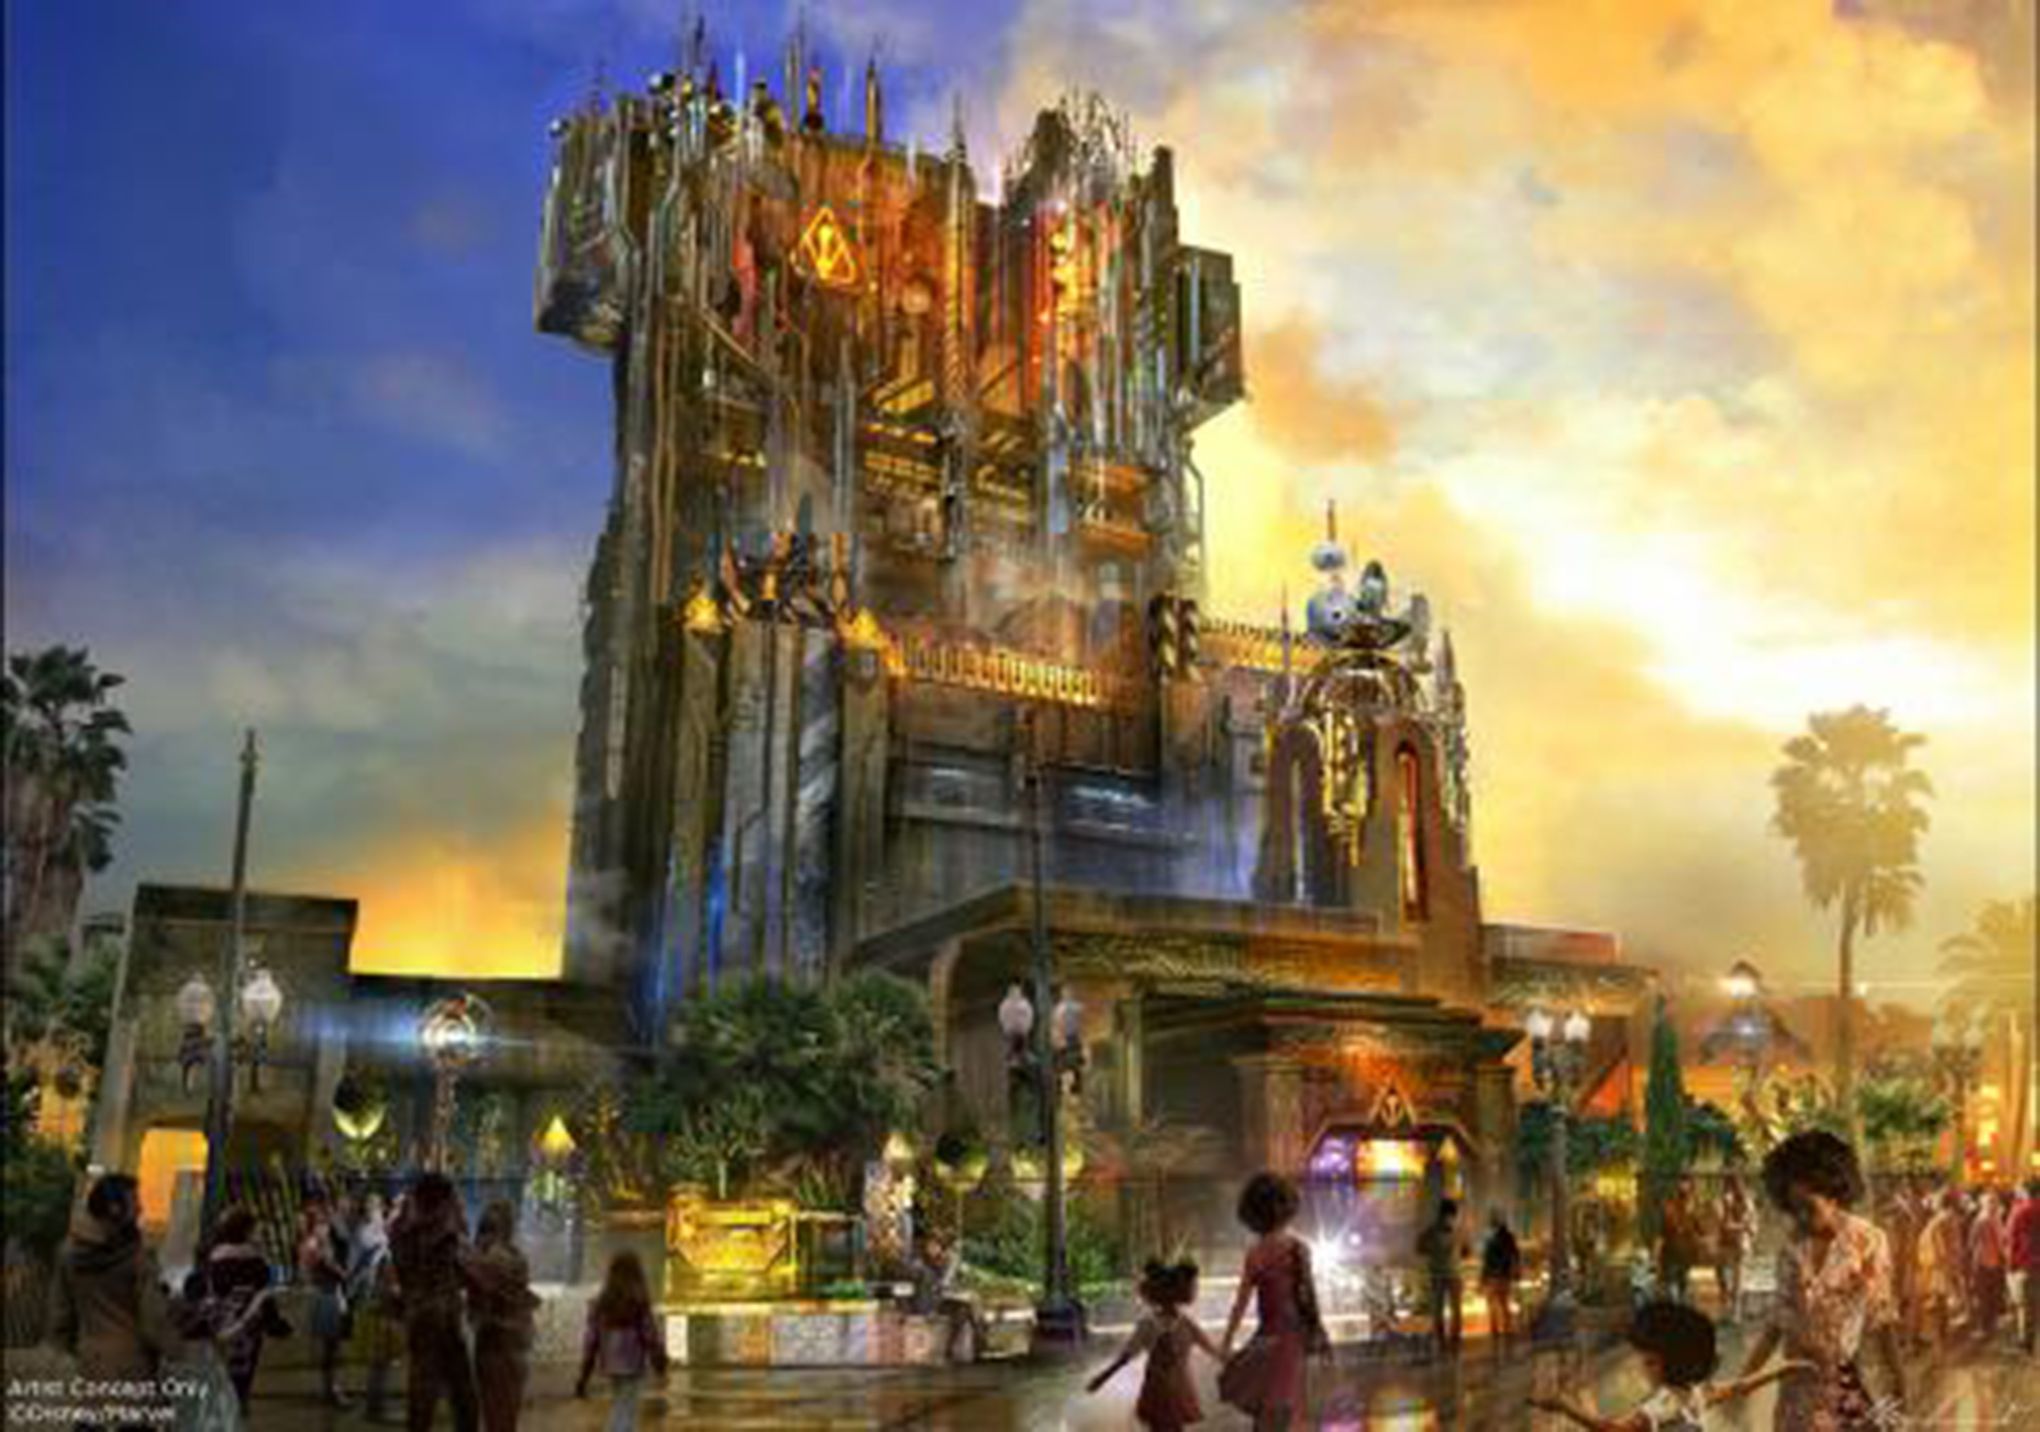 DETAILS: A step-by-step breakout of the new Disneyland Resort